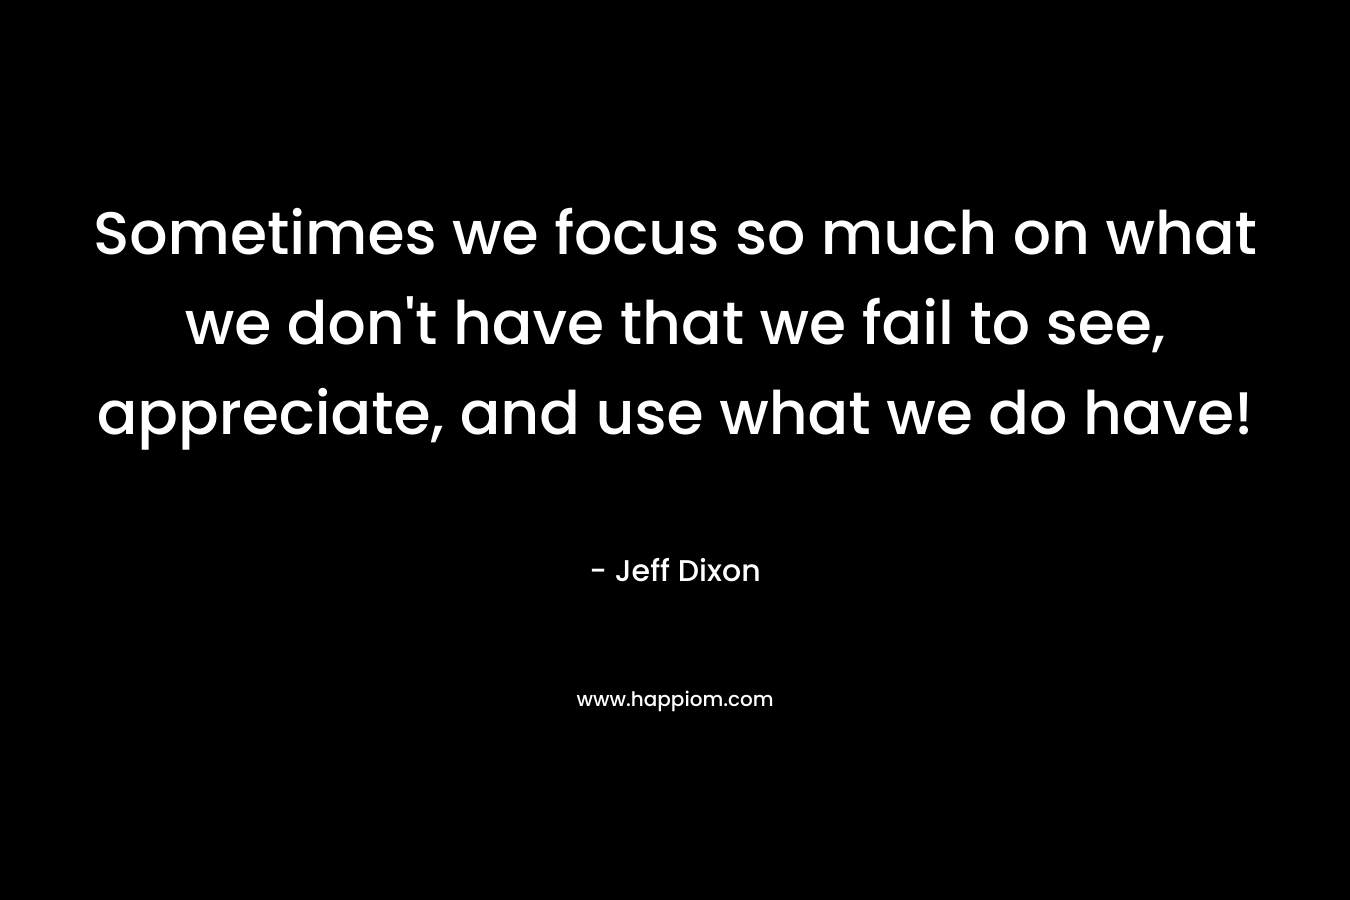 Sometimes we focus so much on what we don't have that we fail to see, appreciate, and use what we do have!